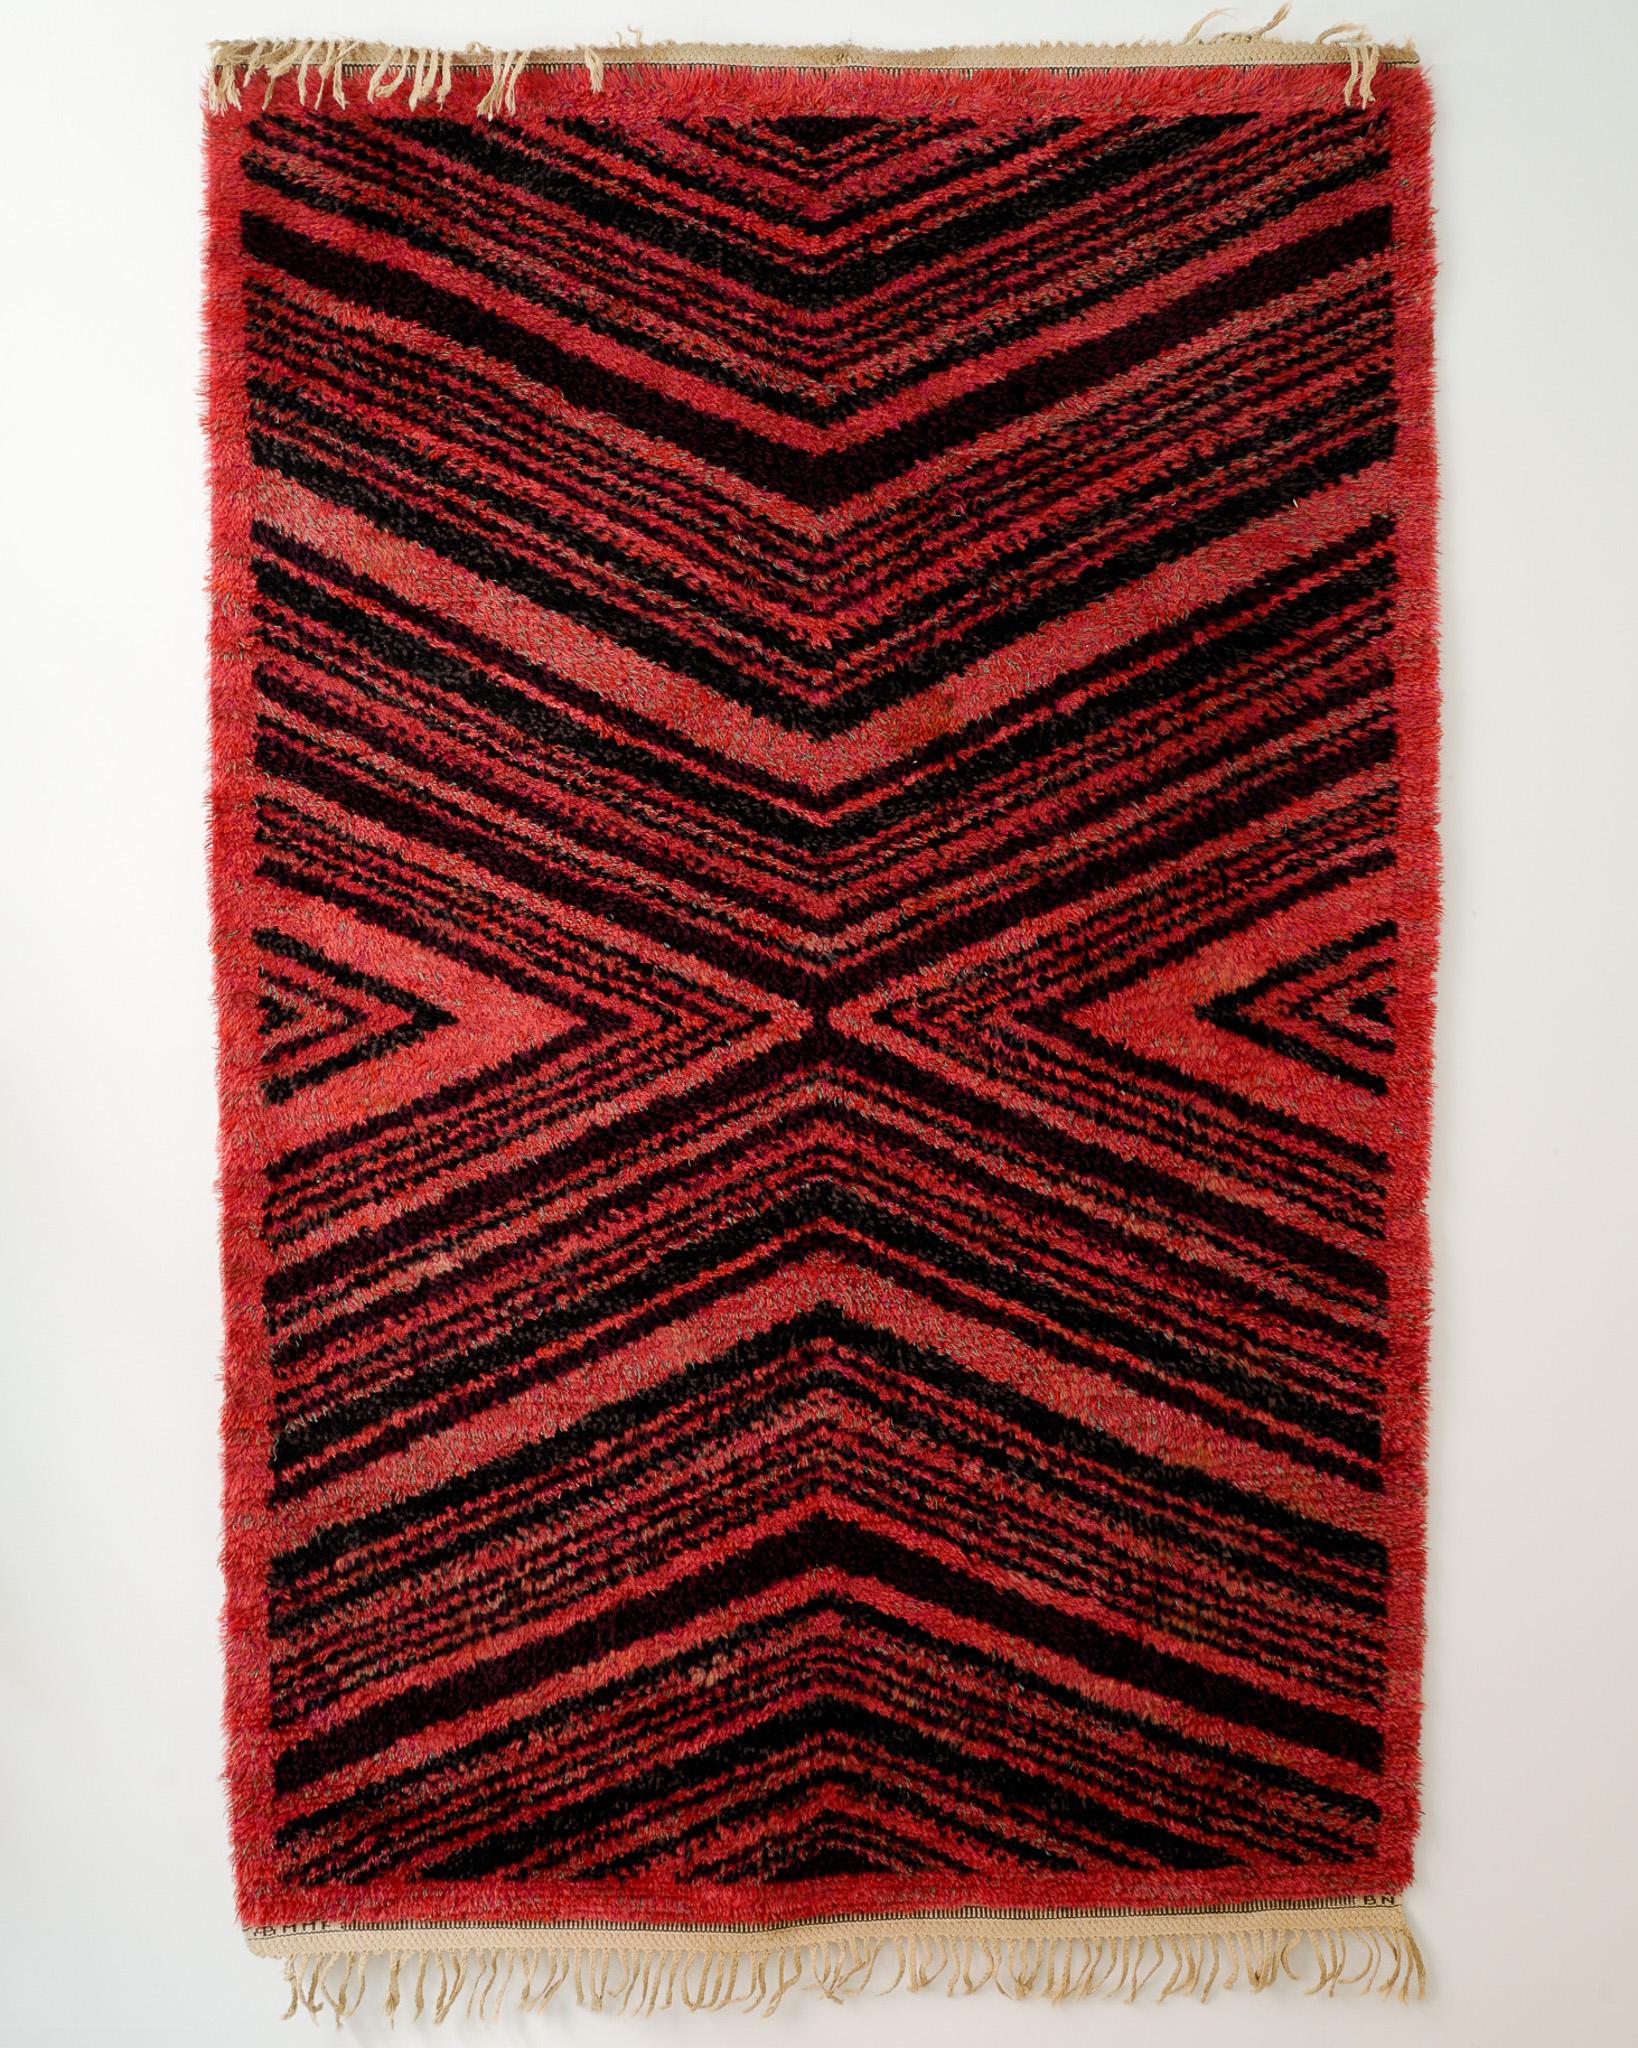 Rare Swedish mid century carpet / rug in shaggy red and black wool by the well known designer Barbro Nilsson produced by Märta Måås-Fjetterström, 1940s. In good original condition, some missing fringes. 
Signed 